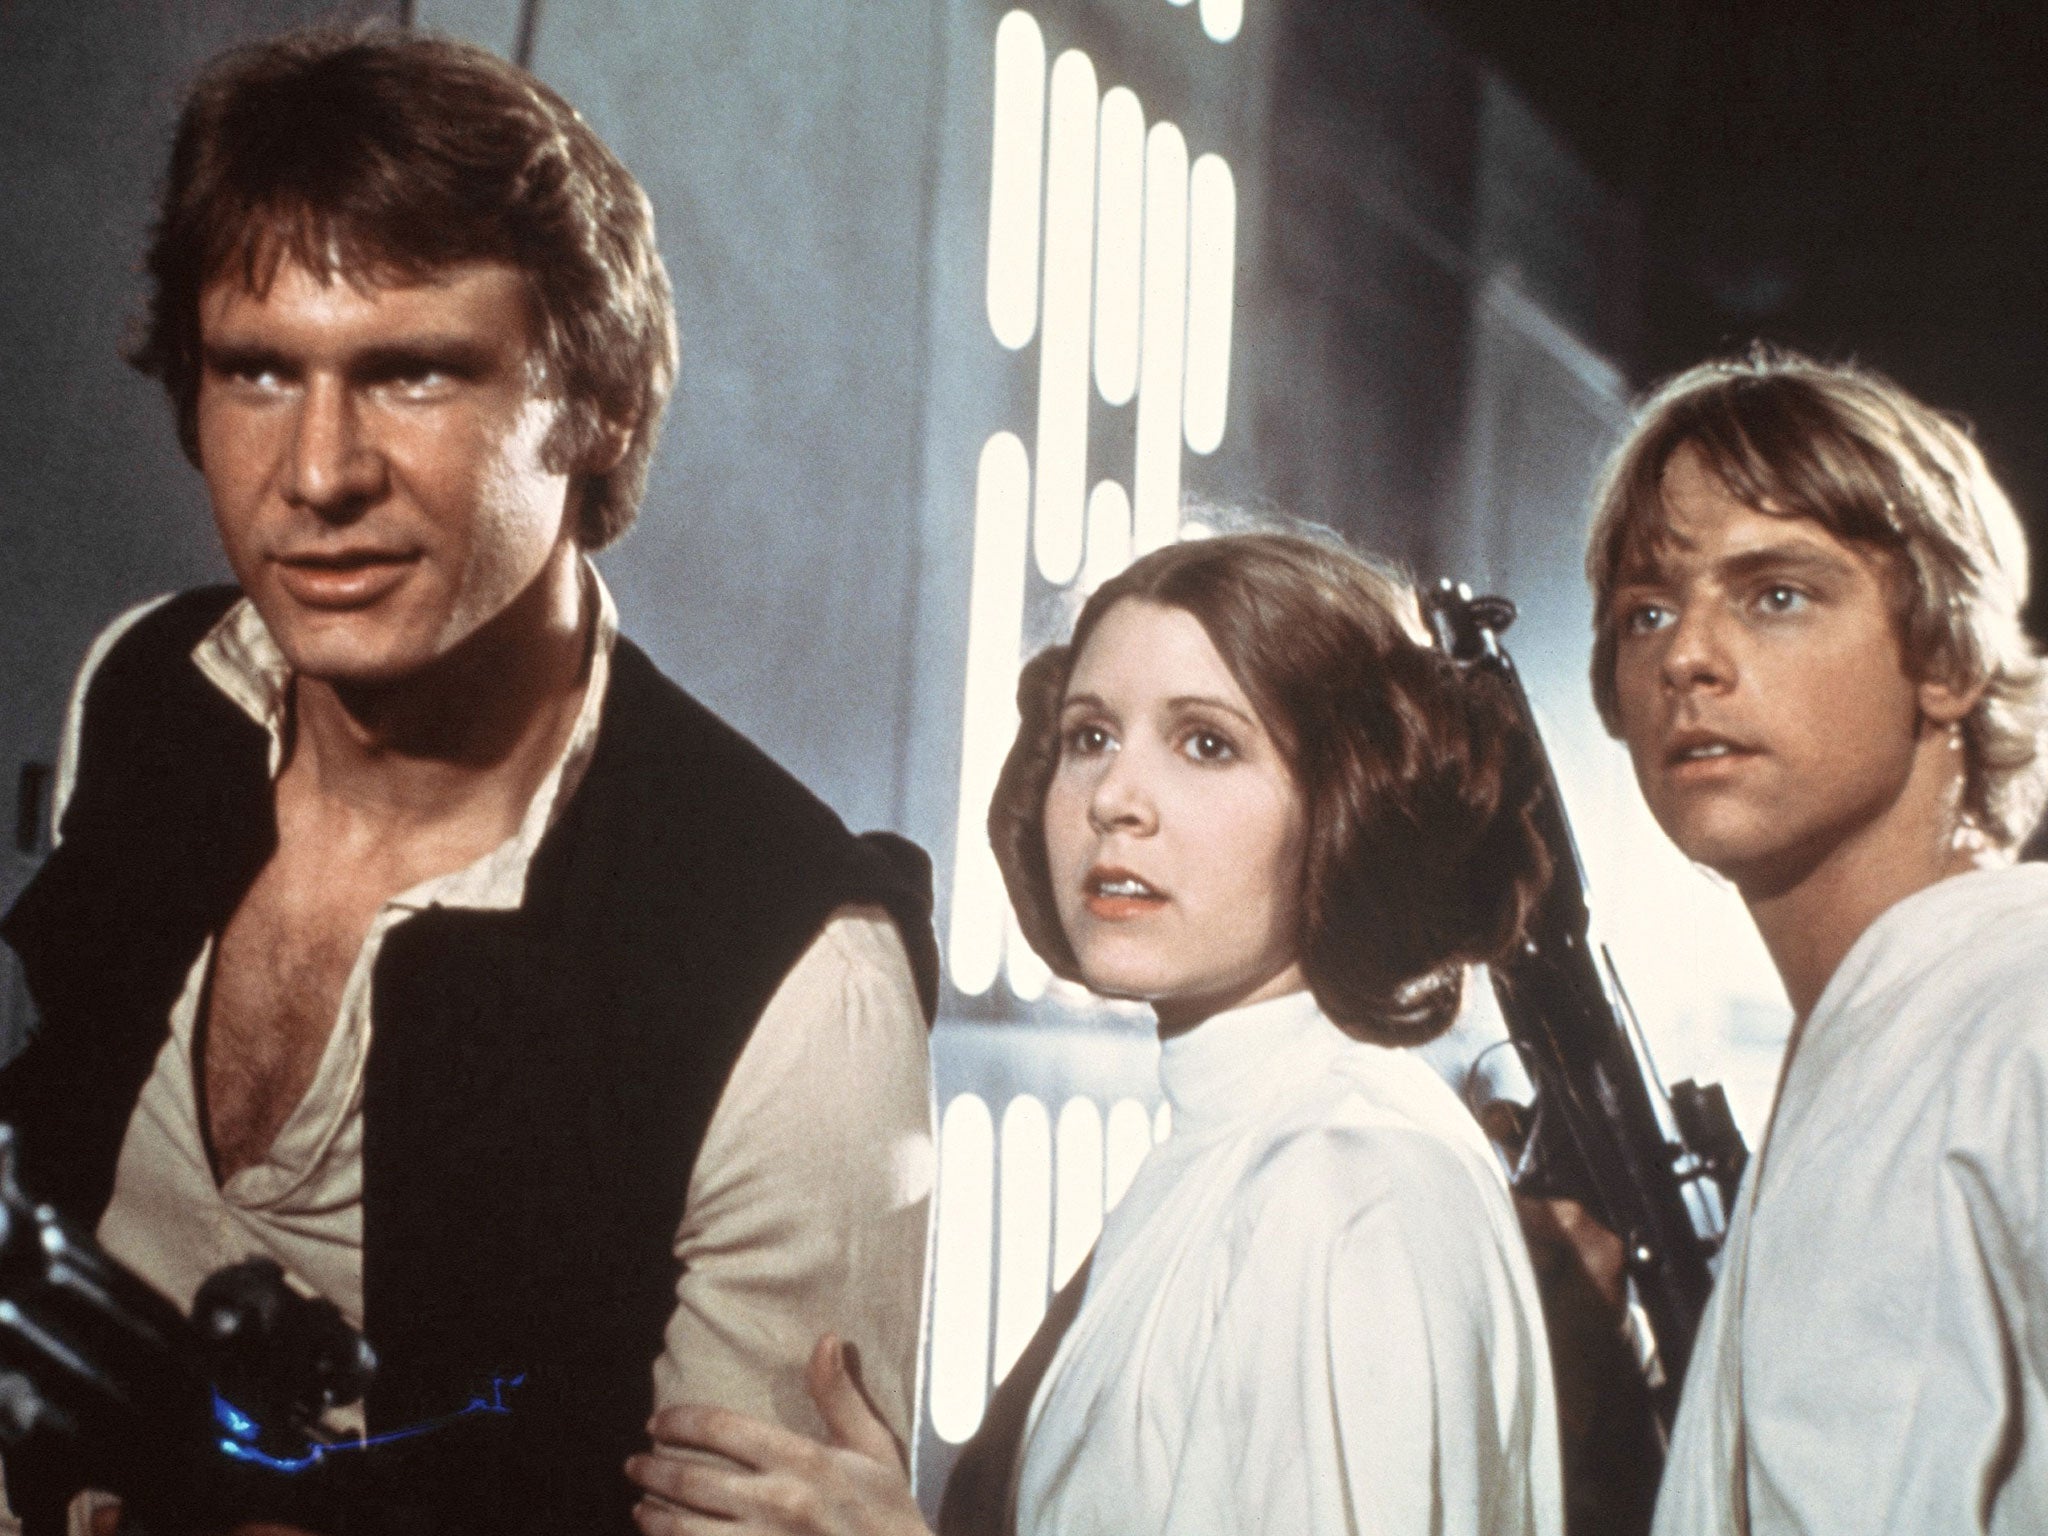 The original Star Wars trio of Harrison Ford, Carrie Fisher and Mark Hamill